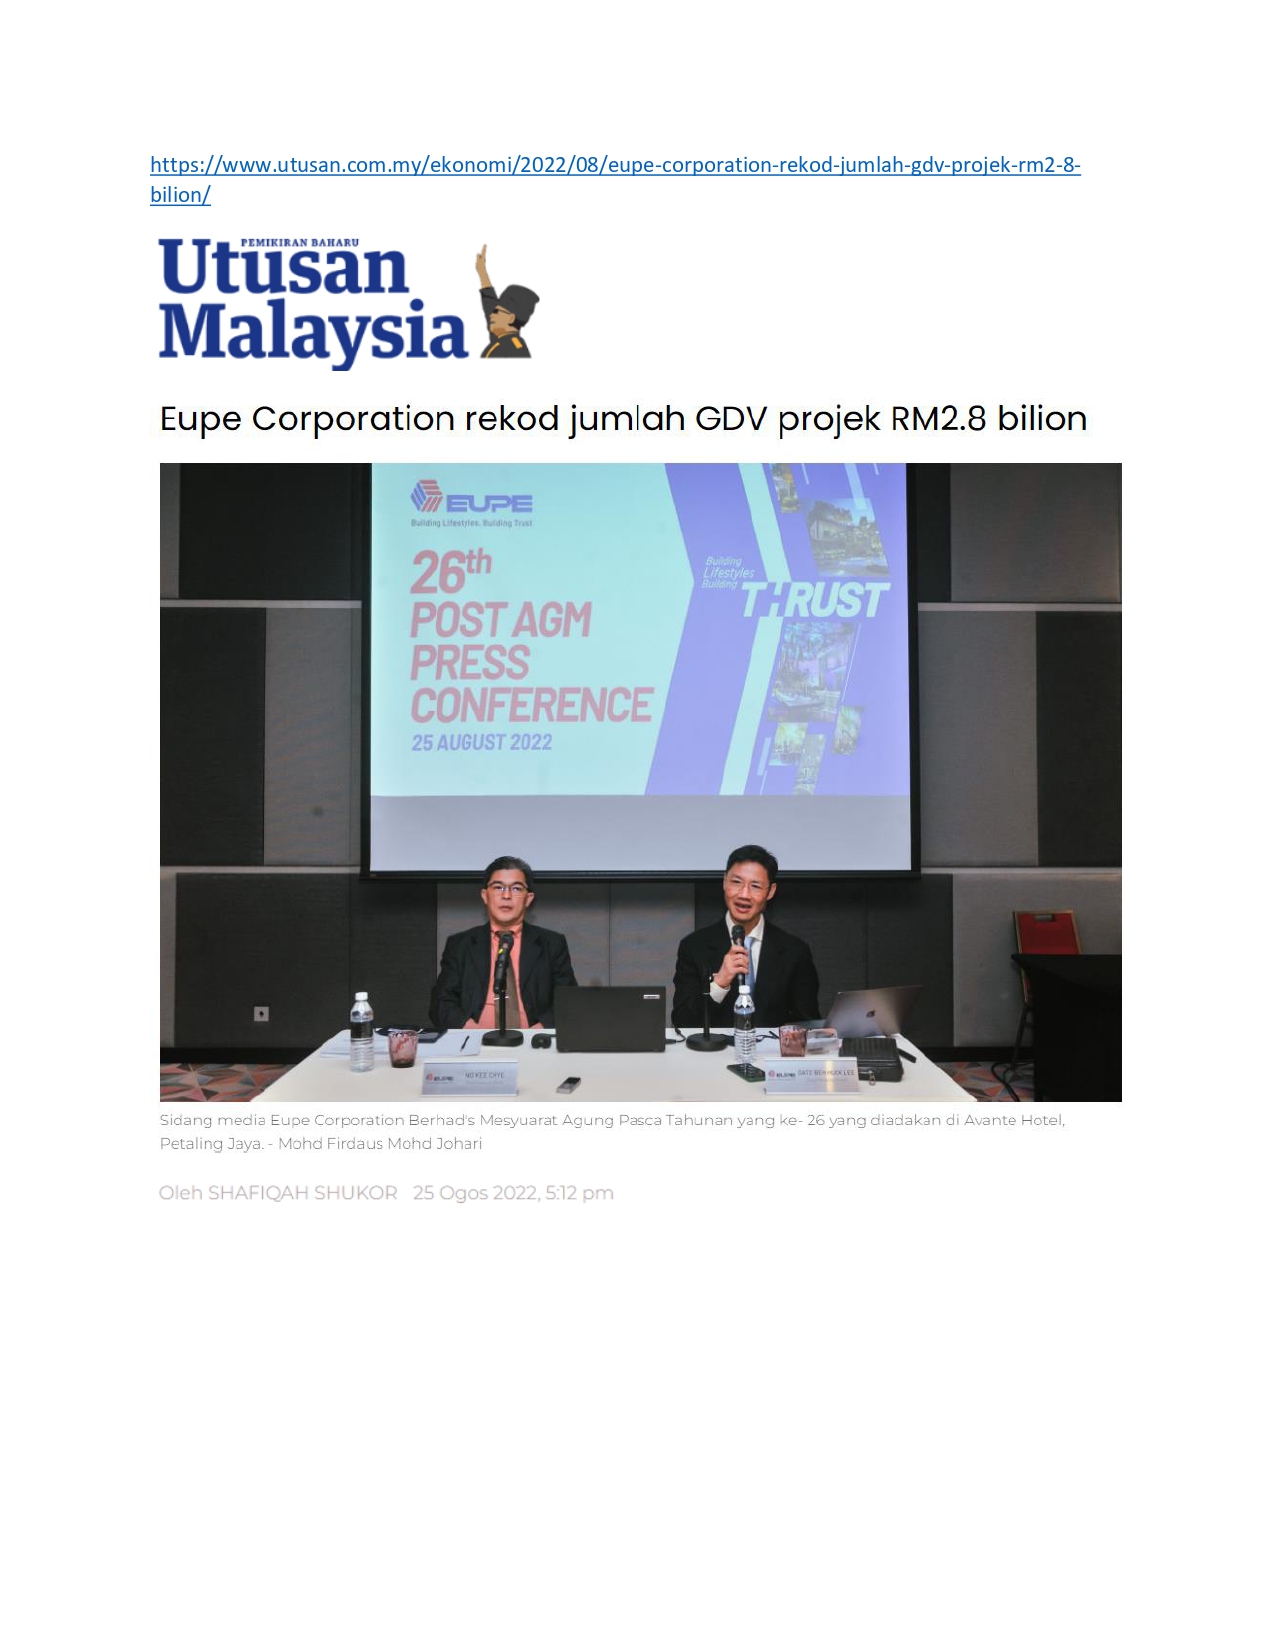 The Edge, Berita Harian, Utusan, The Sun : Eupe sees revenue rebound by FY24 amid jump in GDV of projects